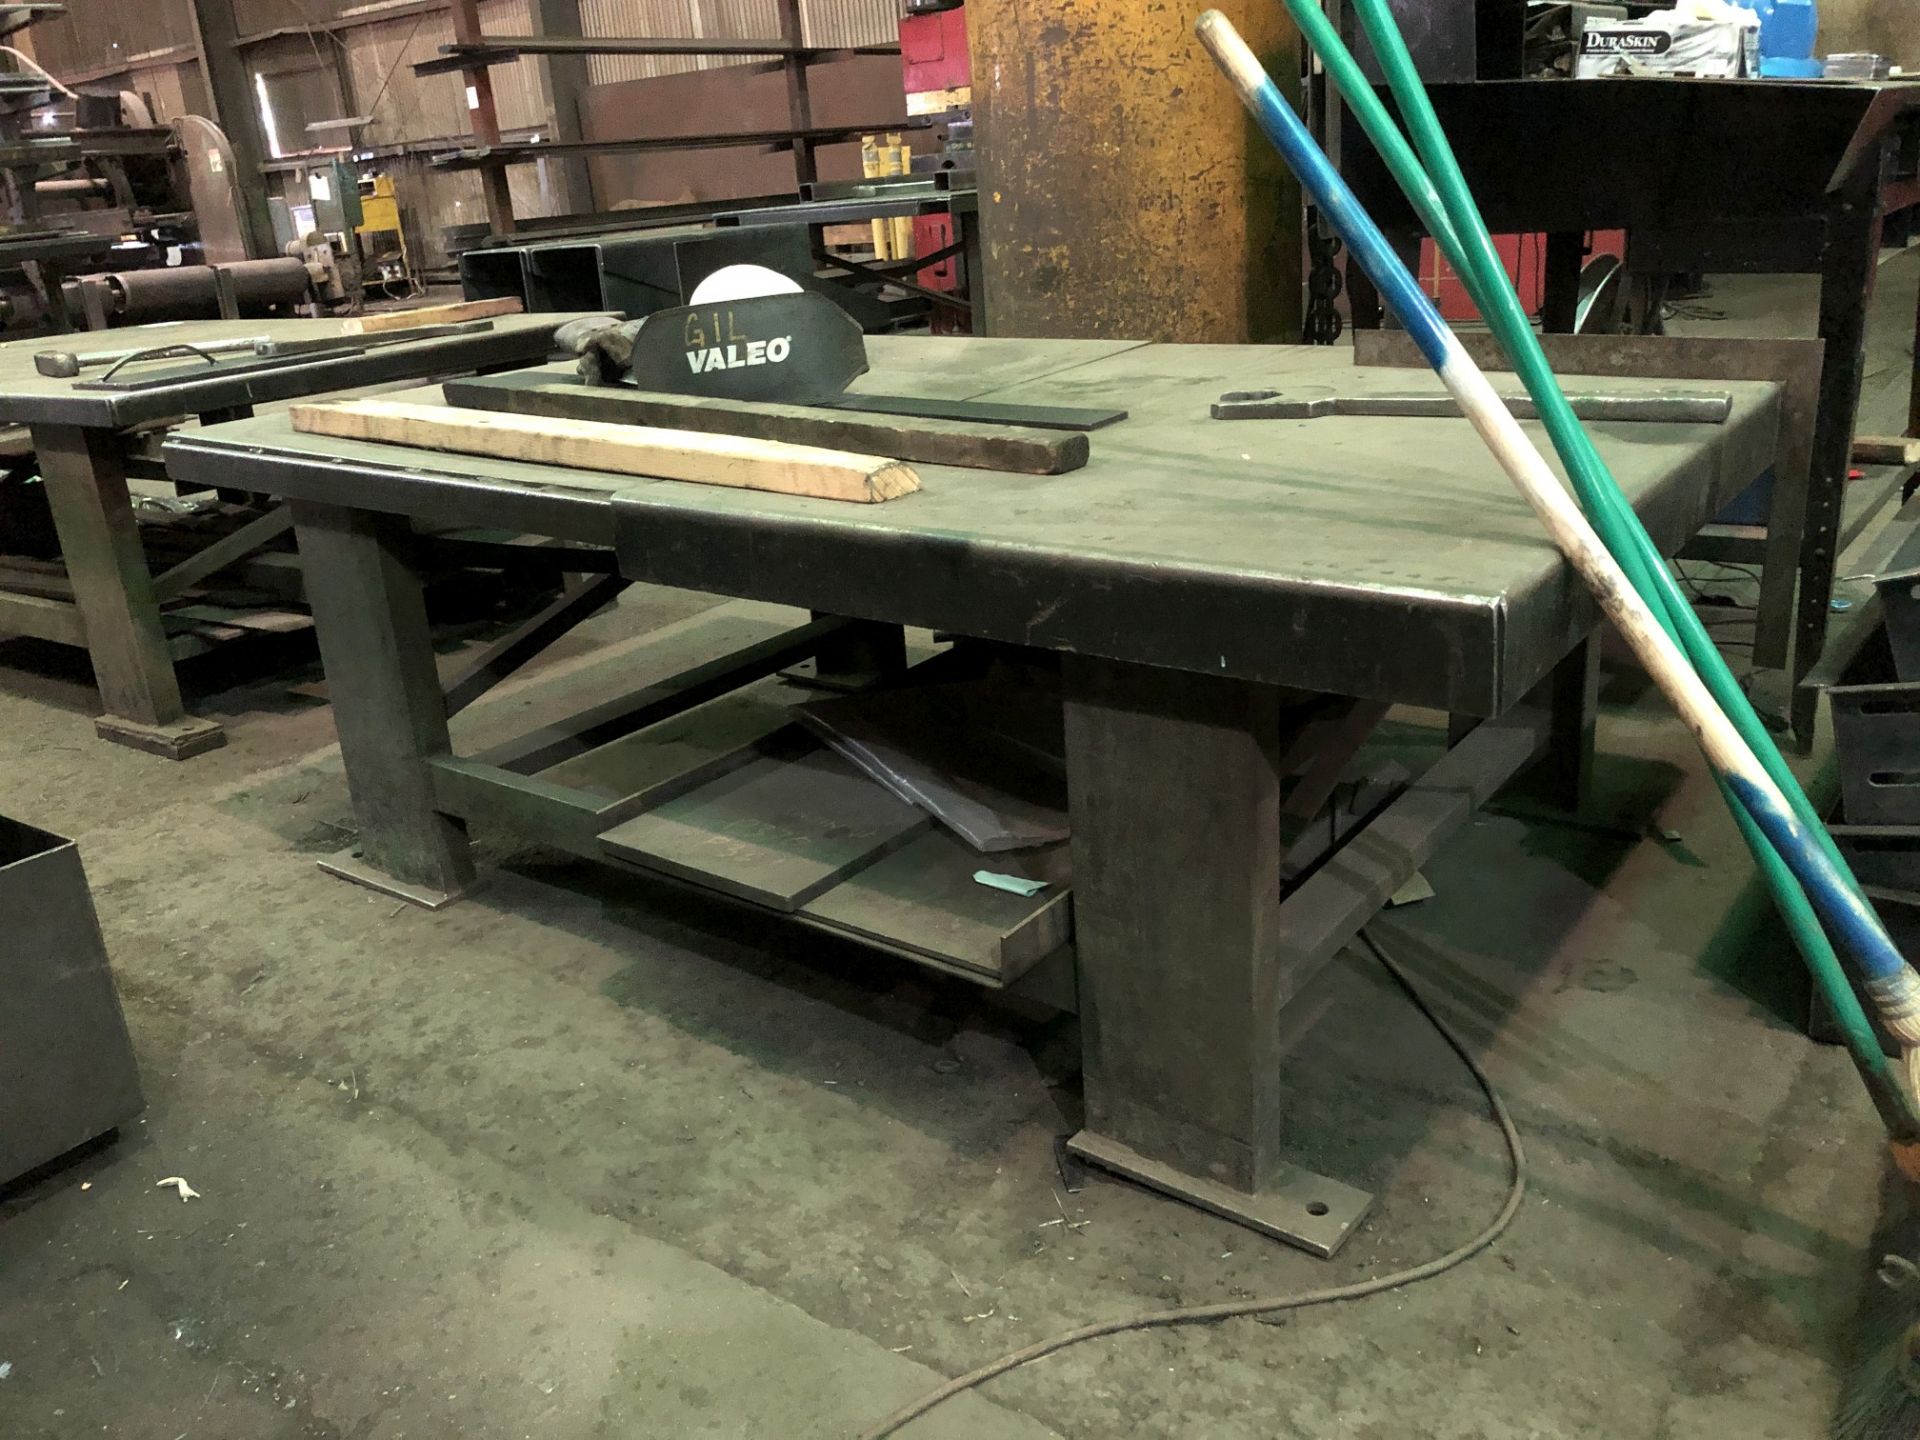 4' x 78" Metal Table (No Contents) [Located at 8830 Vineyard Avenue, Rancho Cucamonga, CA 91730]